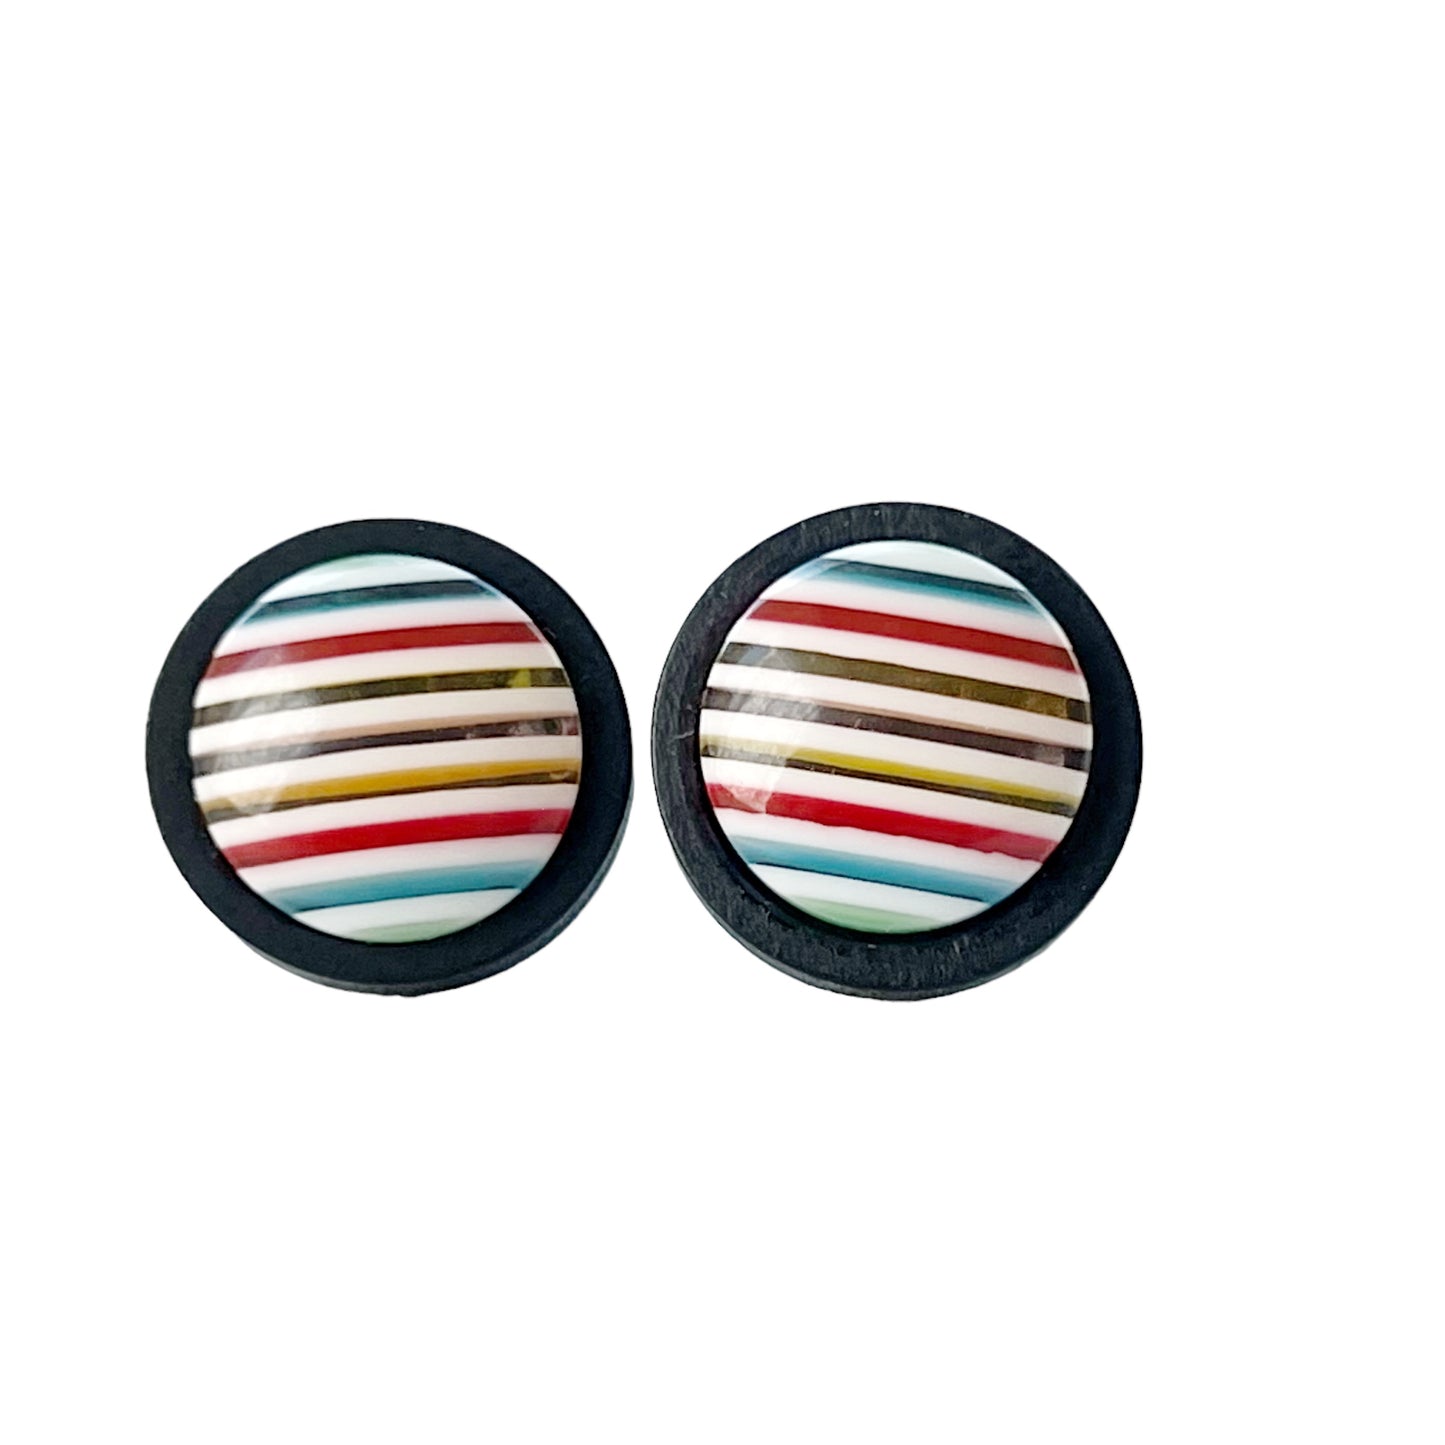 Blue, Red, Yellow Striped Black Wood Stud Earrings - Colorful and Unique Accessories